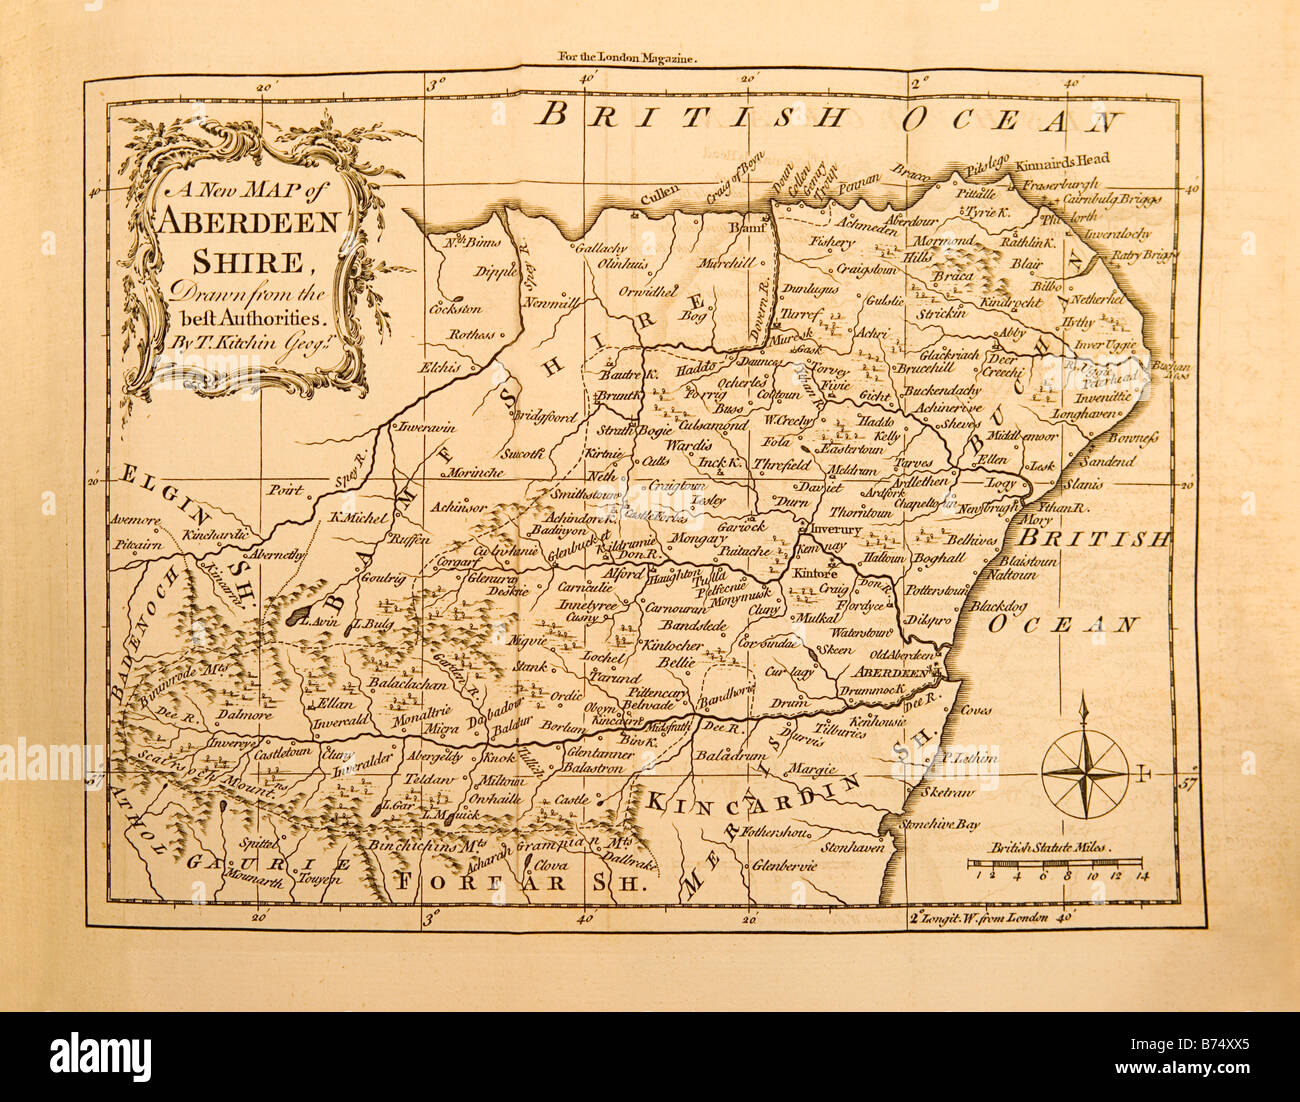 An old map of Aberdenshire in Scotland Stock Photo